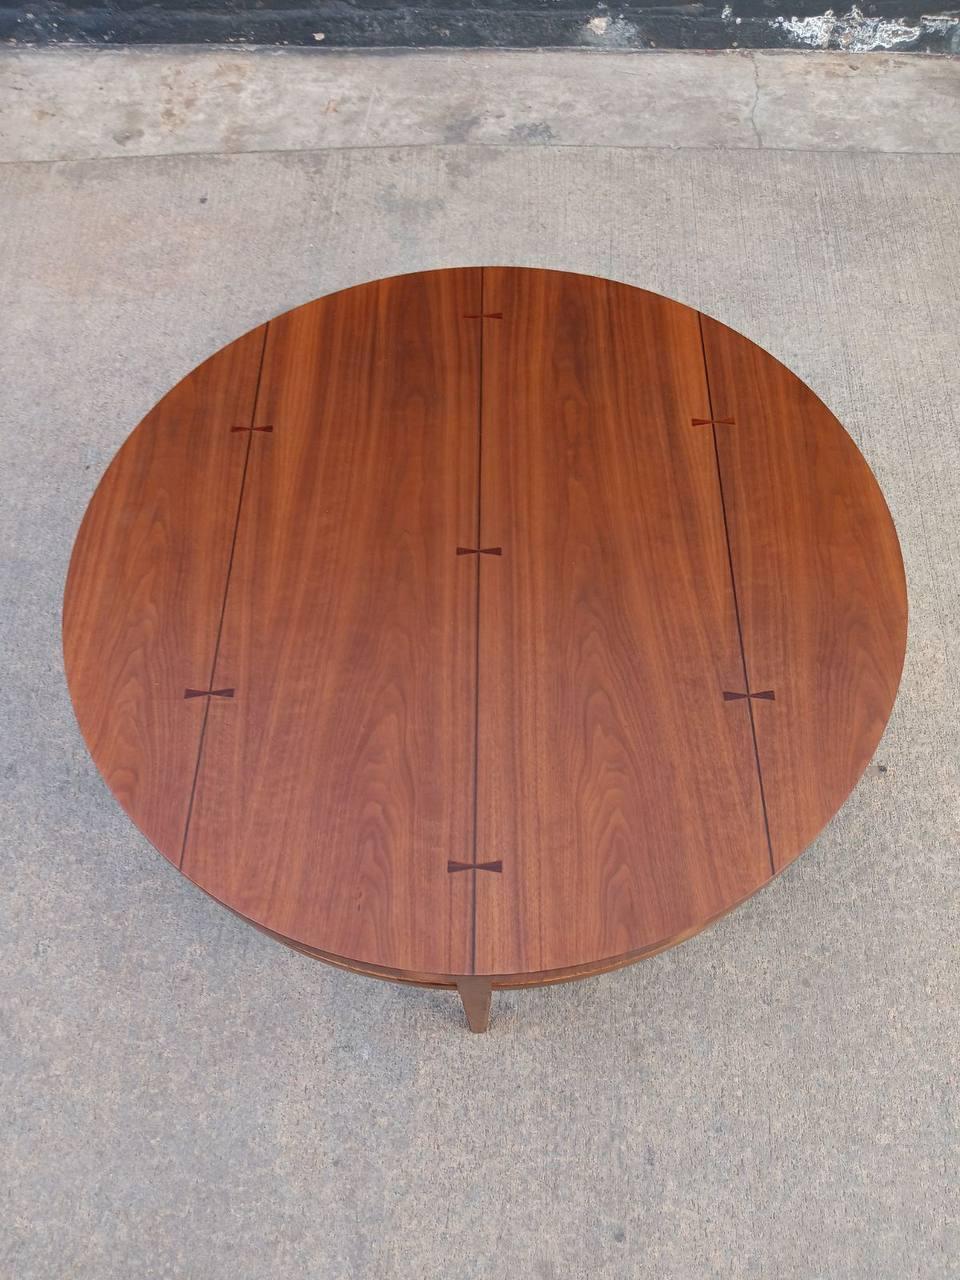 Mid-20th Century Newly Refinished -Mid-Century Modern Walnut Coffee Table Inlaid Bowtie Rosewood  For Sale